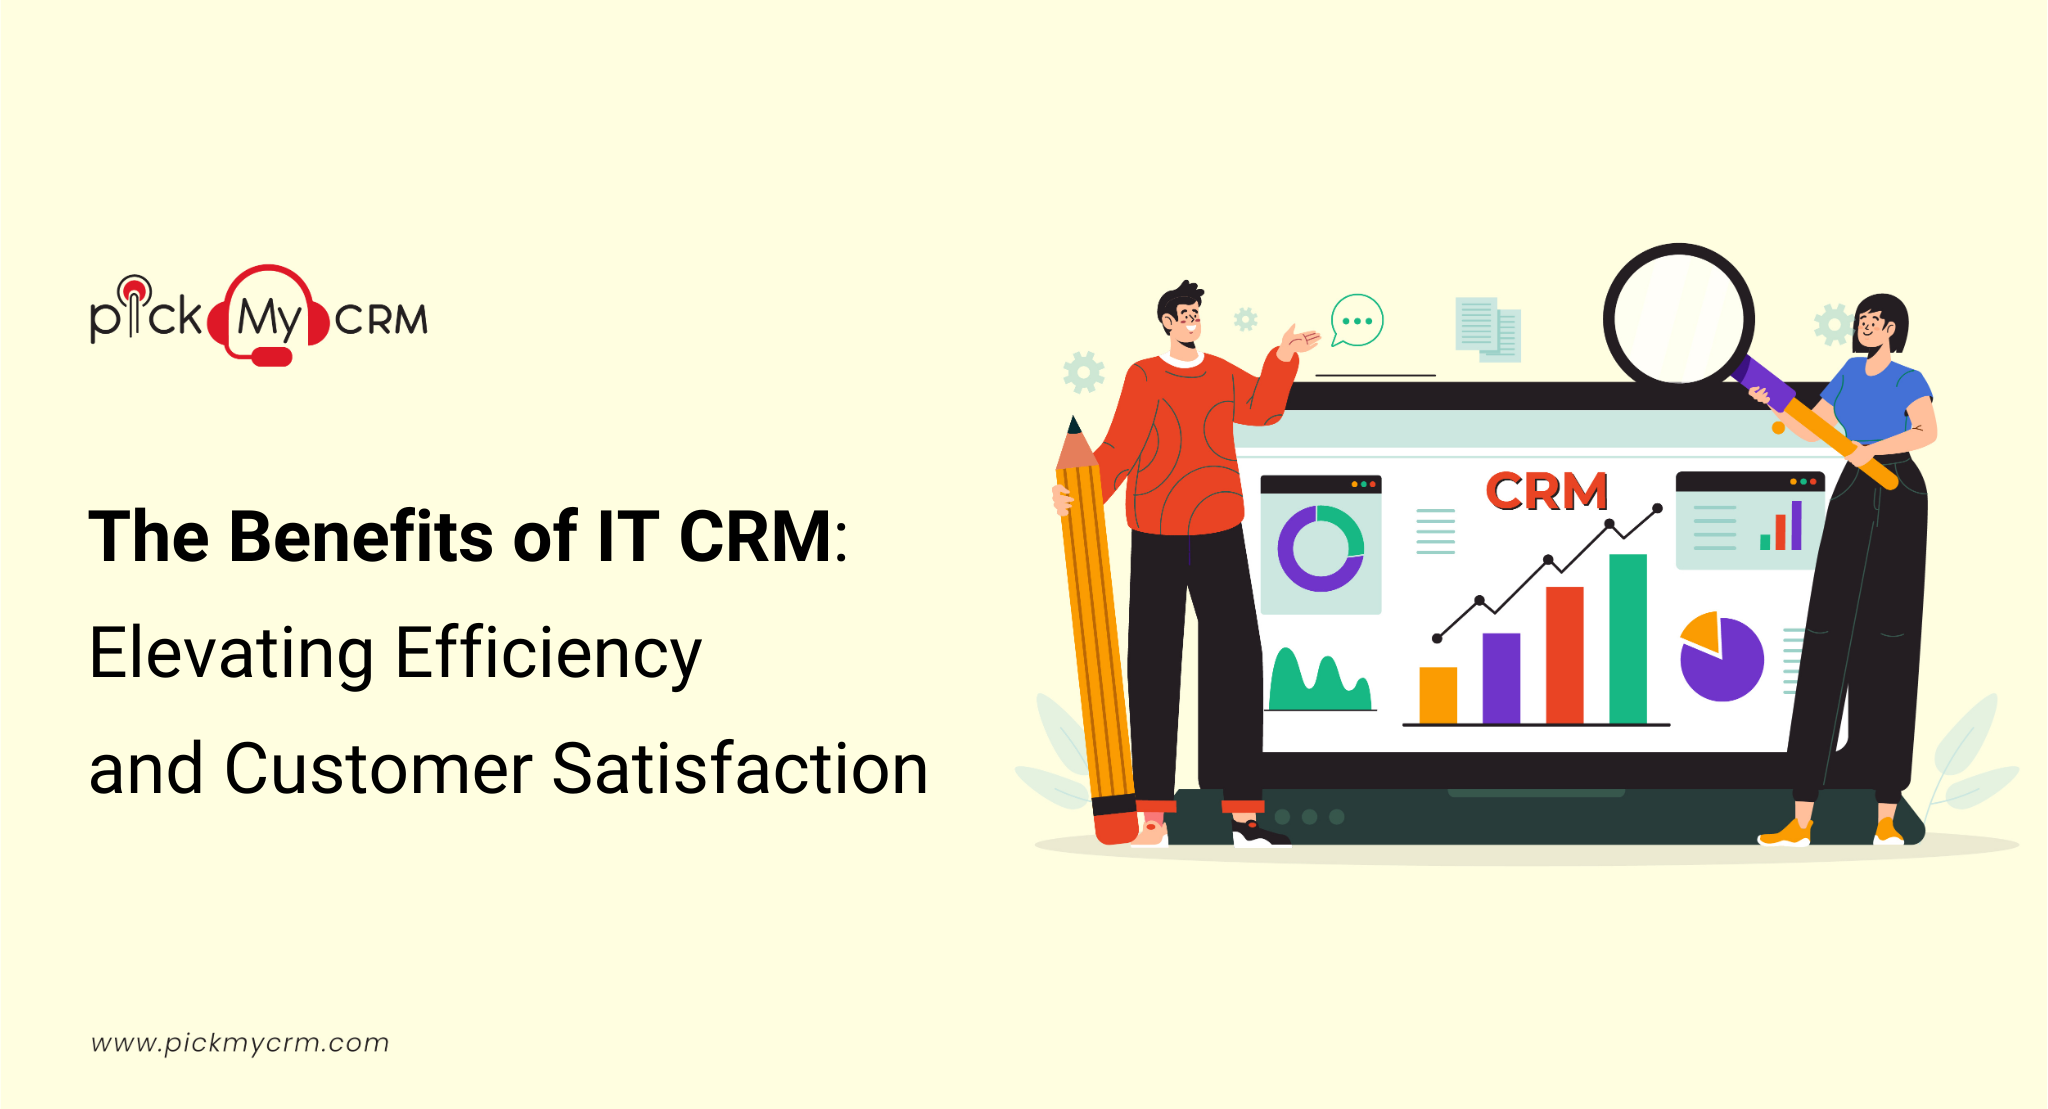 The Benefits of IT CRM: Elevating Efficiency and Customer Satisfaction